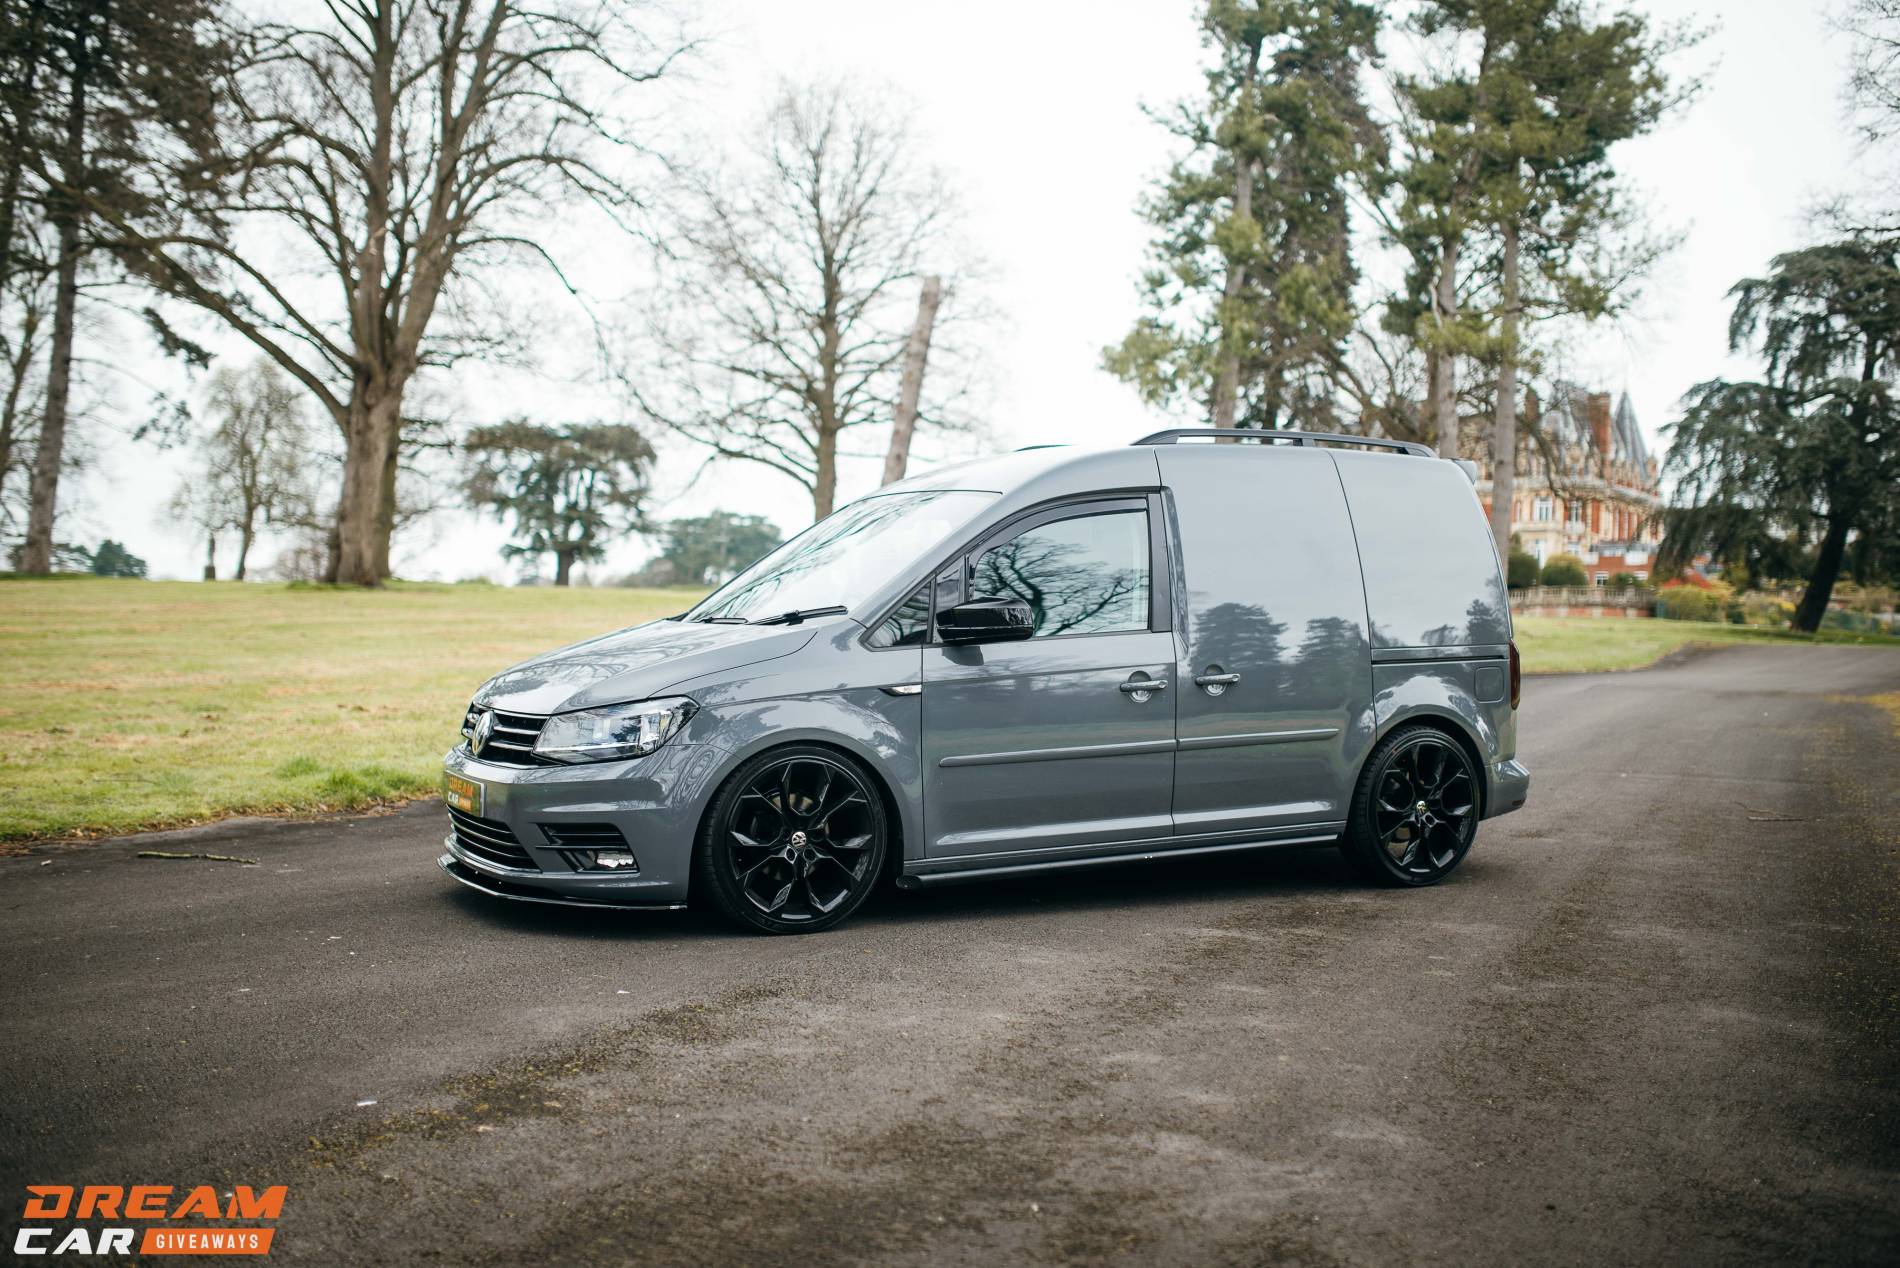 2019 Volkswagen Caddy & £1000 or £18,000 Tax Free